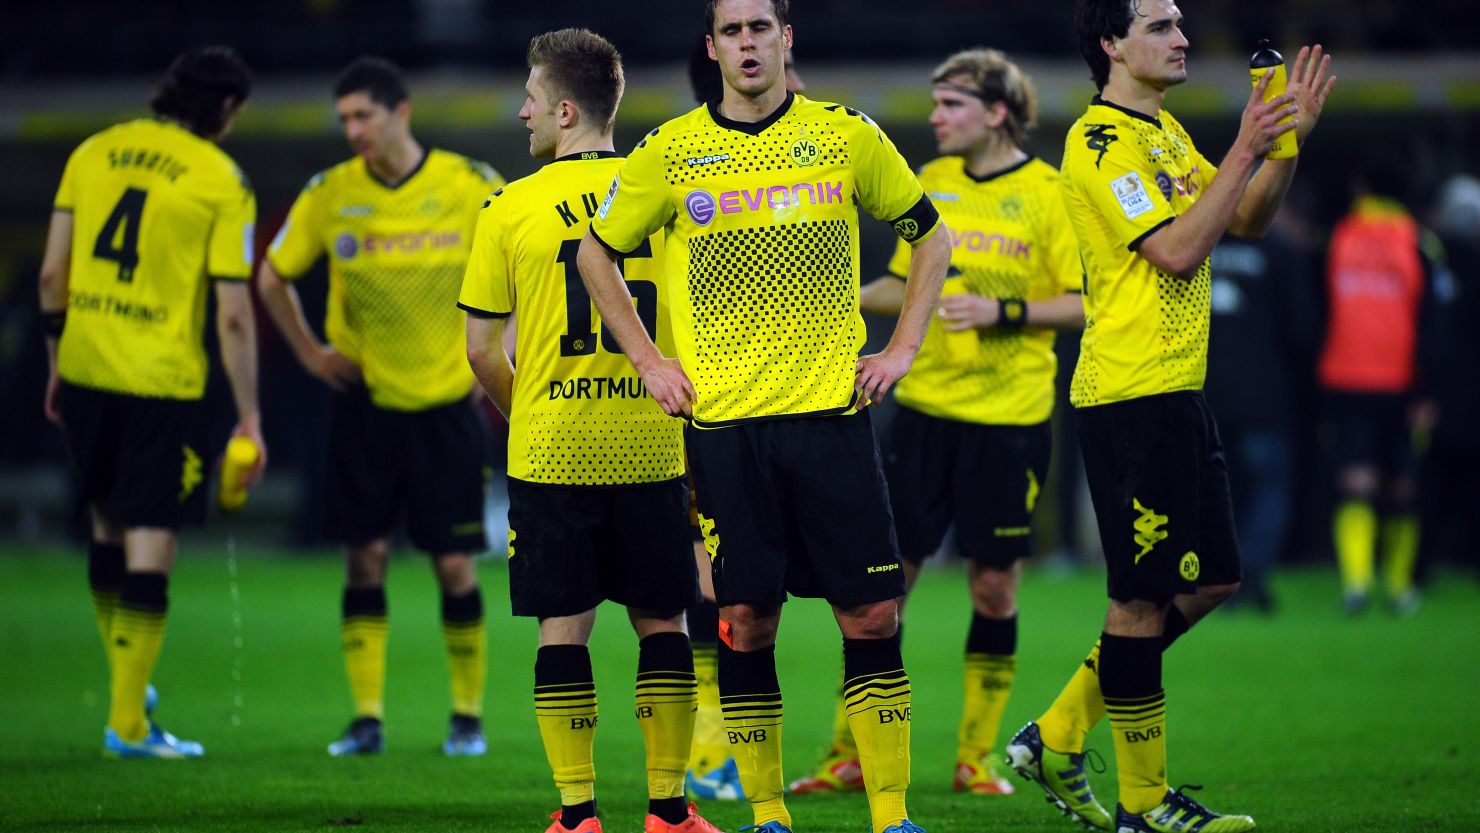 Borussia Dortmund's players react after the end of their 4-4 home draw to Stuttgart in the Bundesliga.